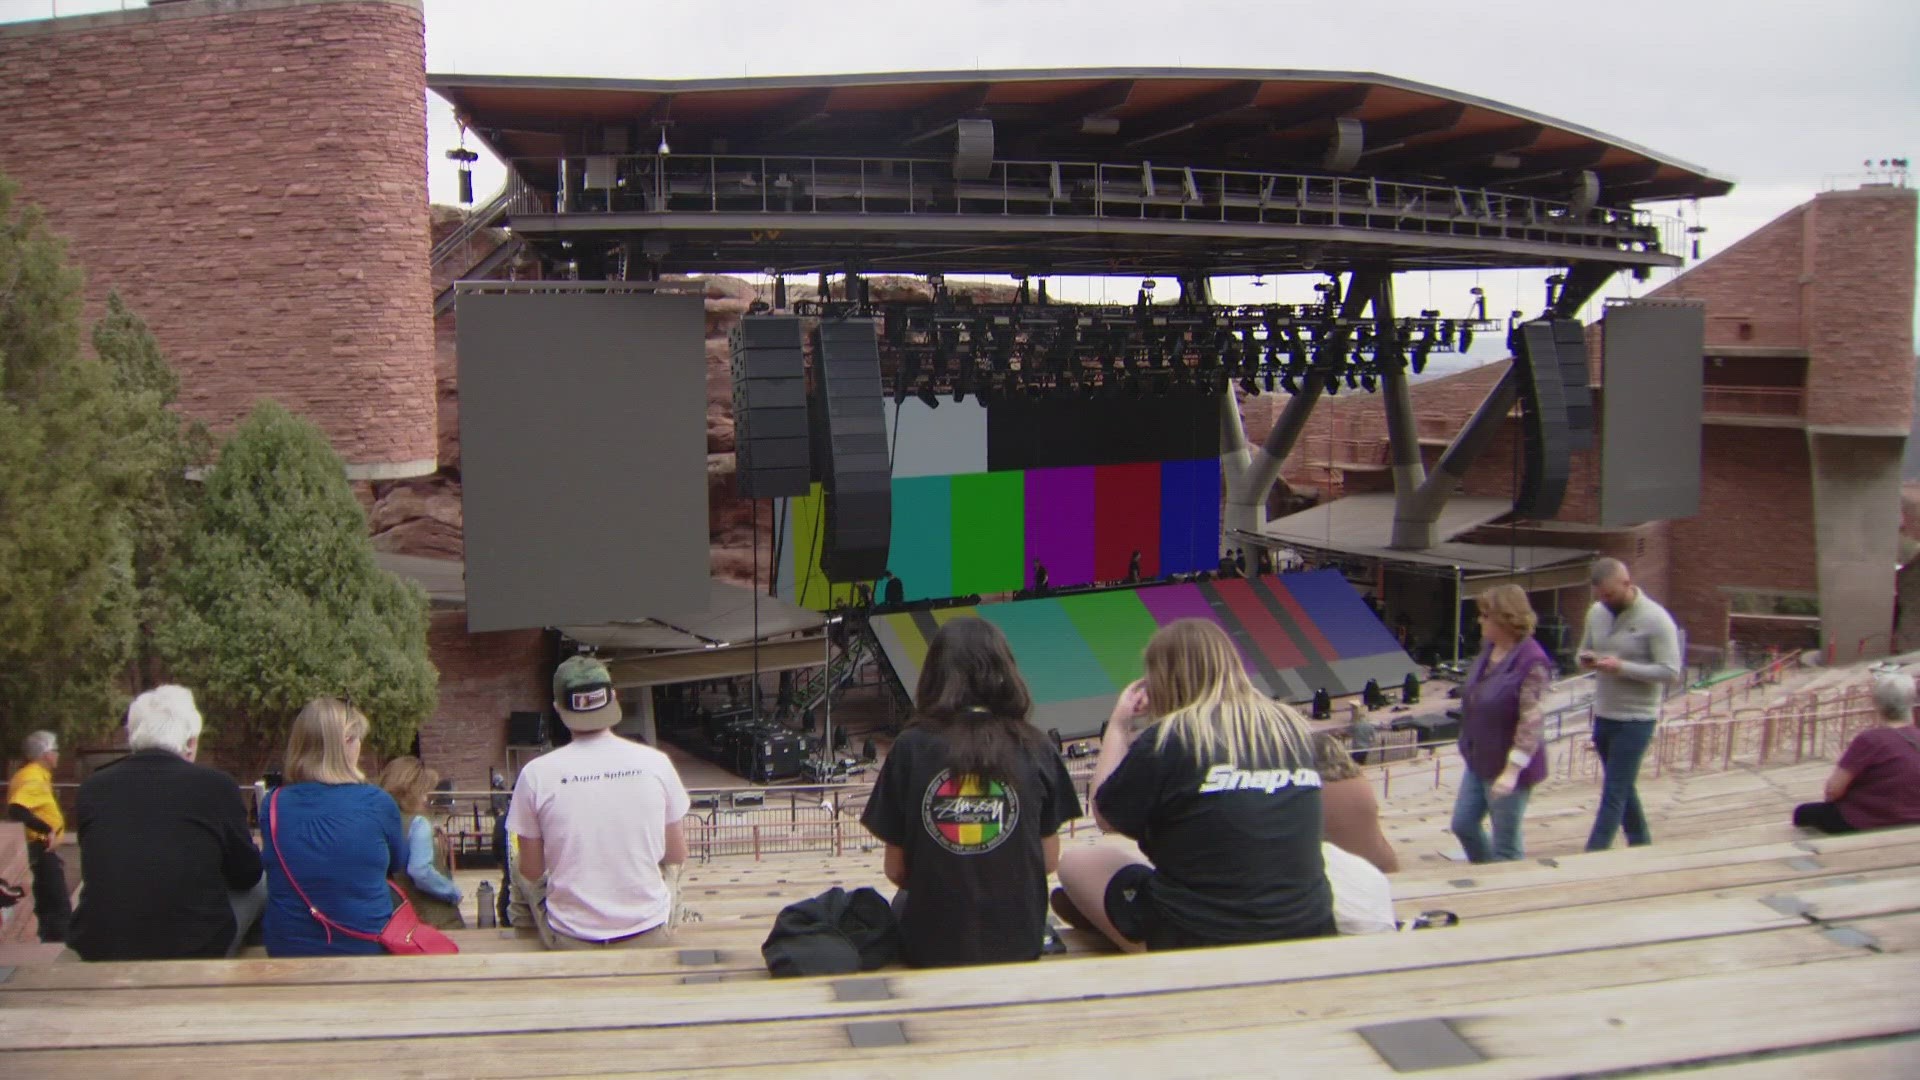 9NEWS reporter Jaleesa Irizarry explains this issue is not exclusive to Red Rocks or just one ticket company.